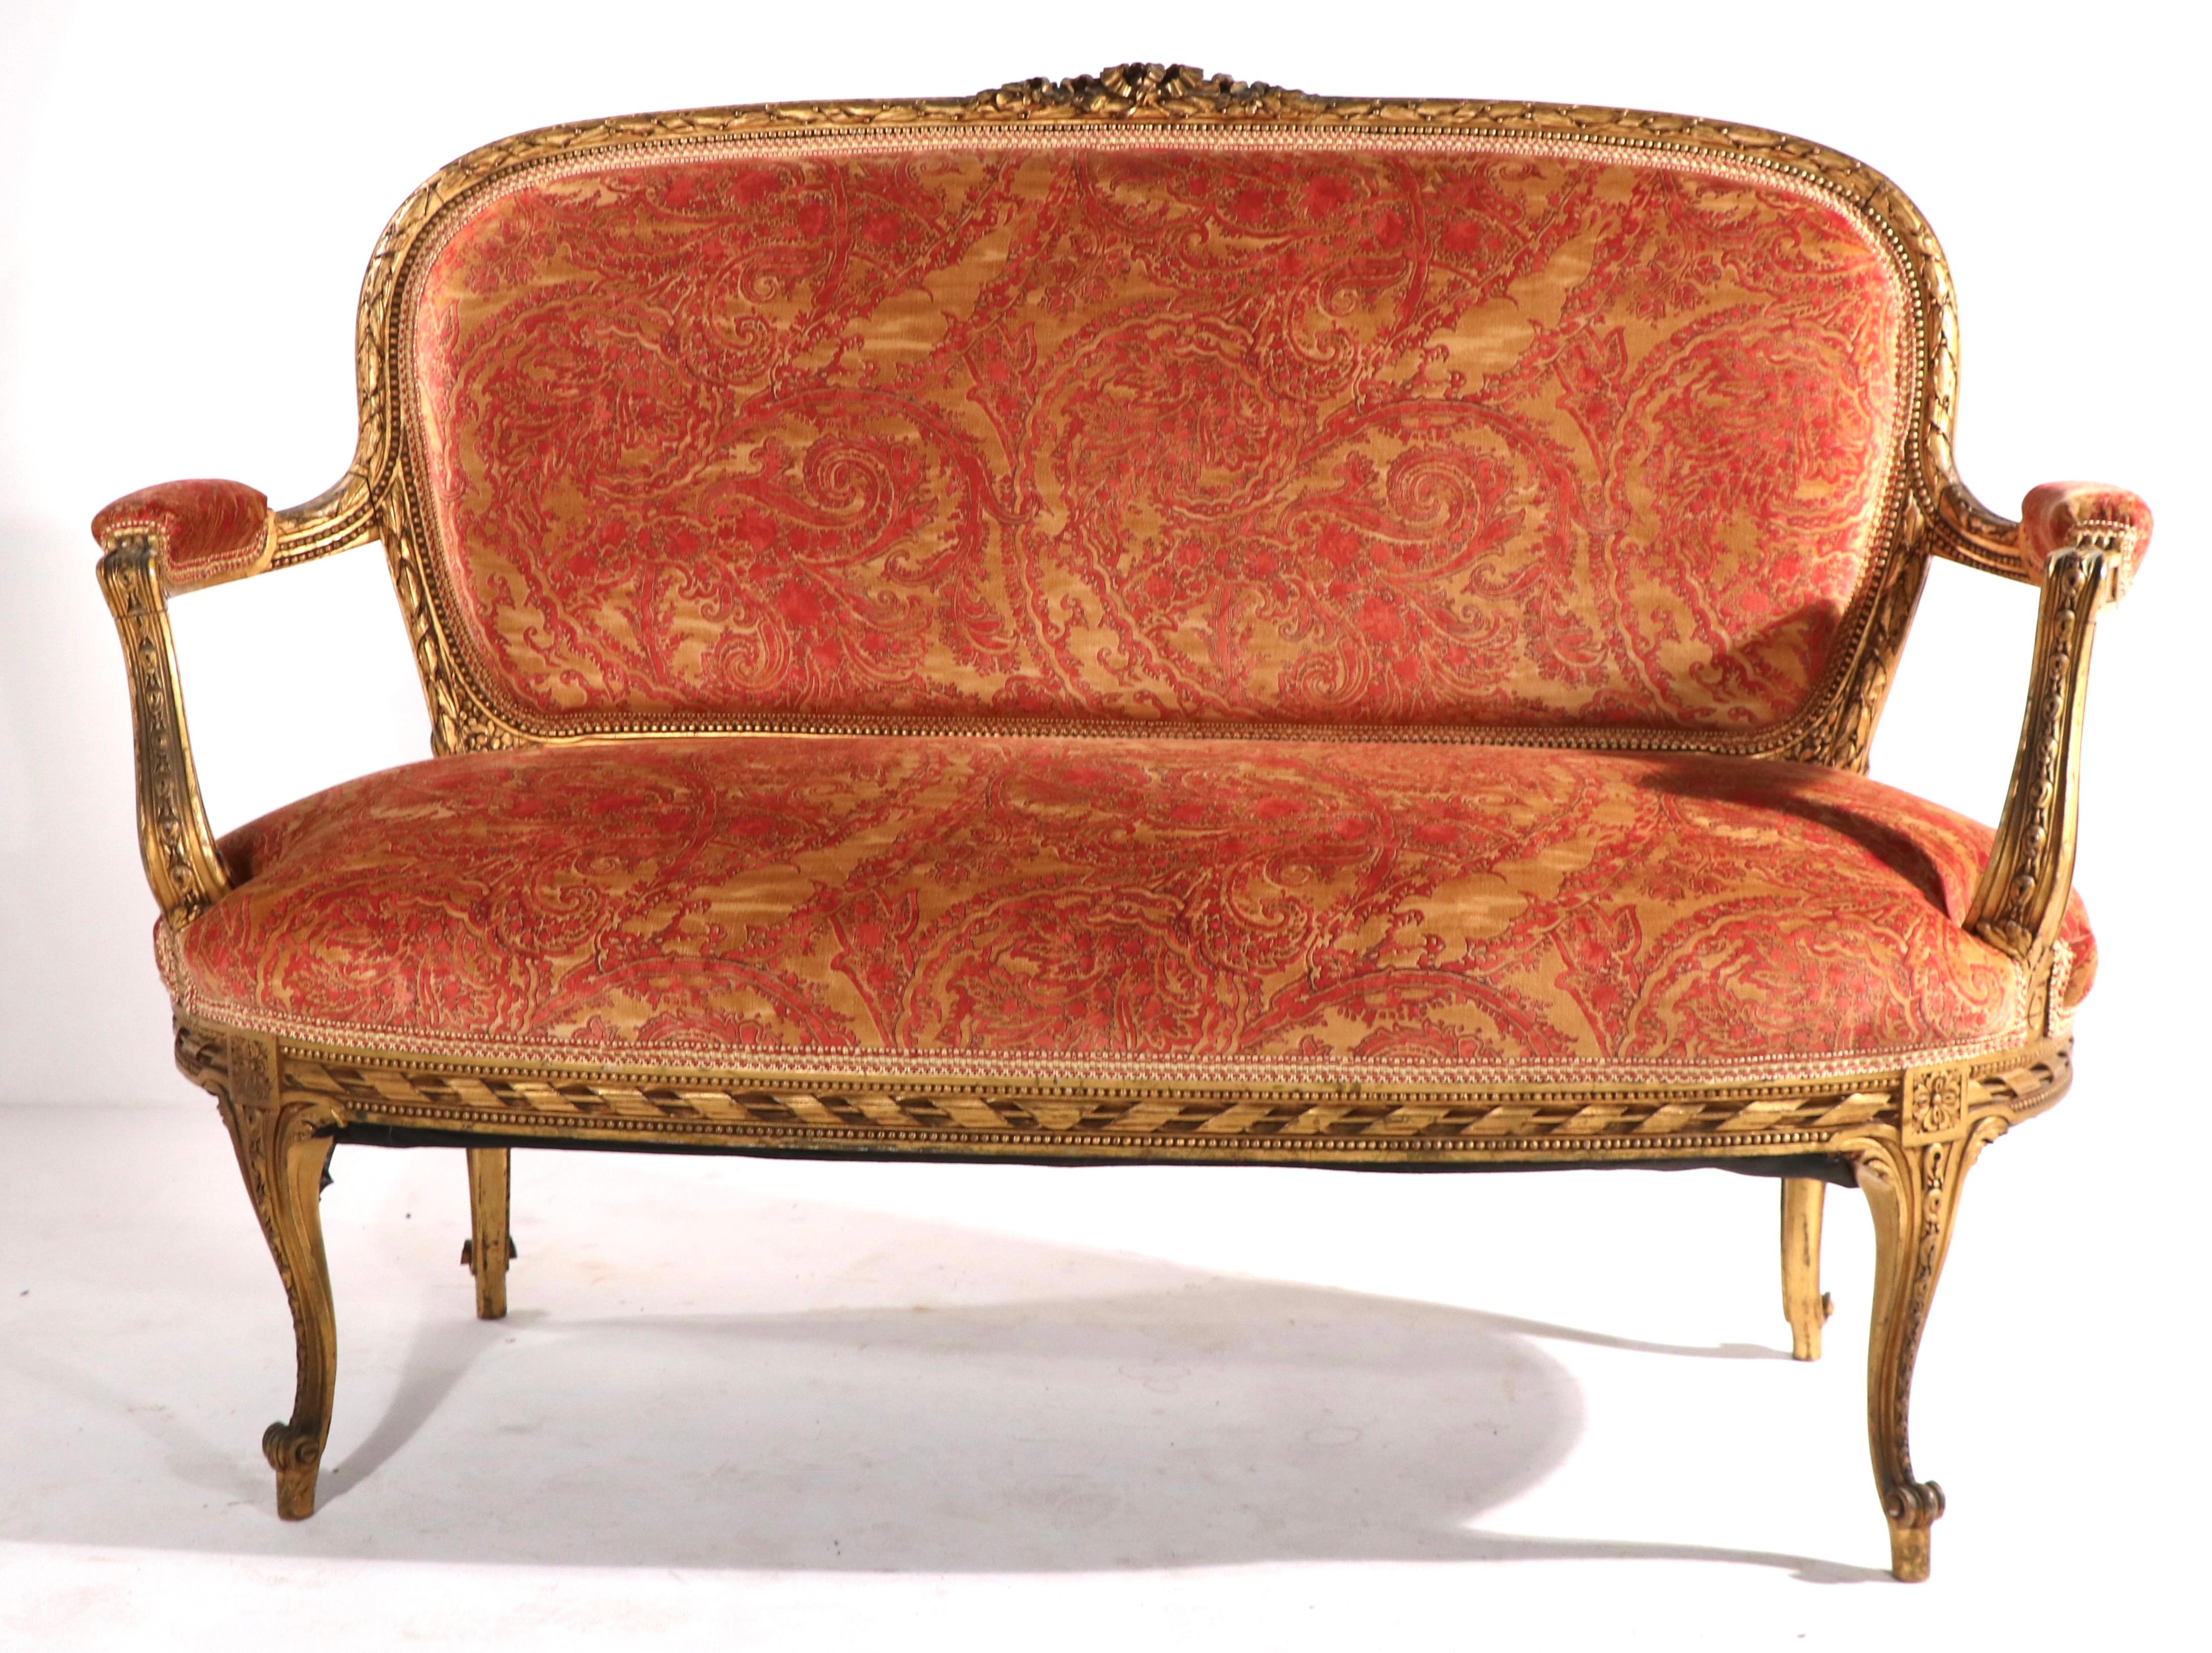 Exceptional gilt settee with Fortuny fabric upholstery. We believe the frame is period Louis XVI, but we are not experts in this period. This example is in excellent condition, clean and ready to use. Elegant, sophisticated and chic - top quality